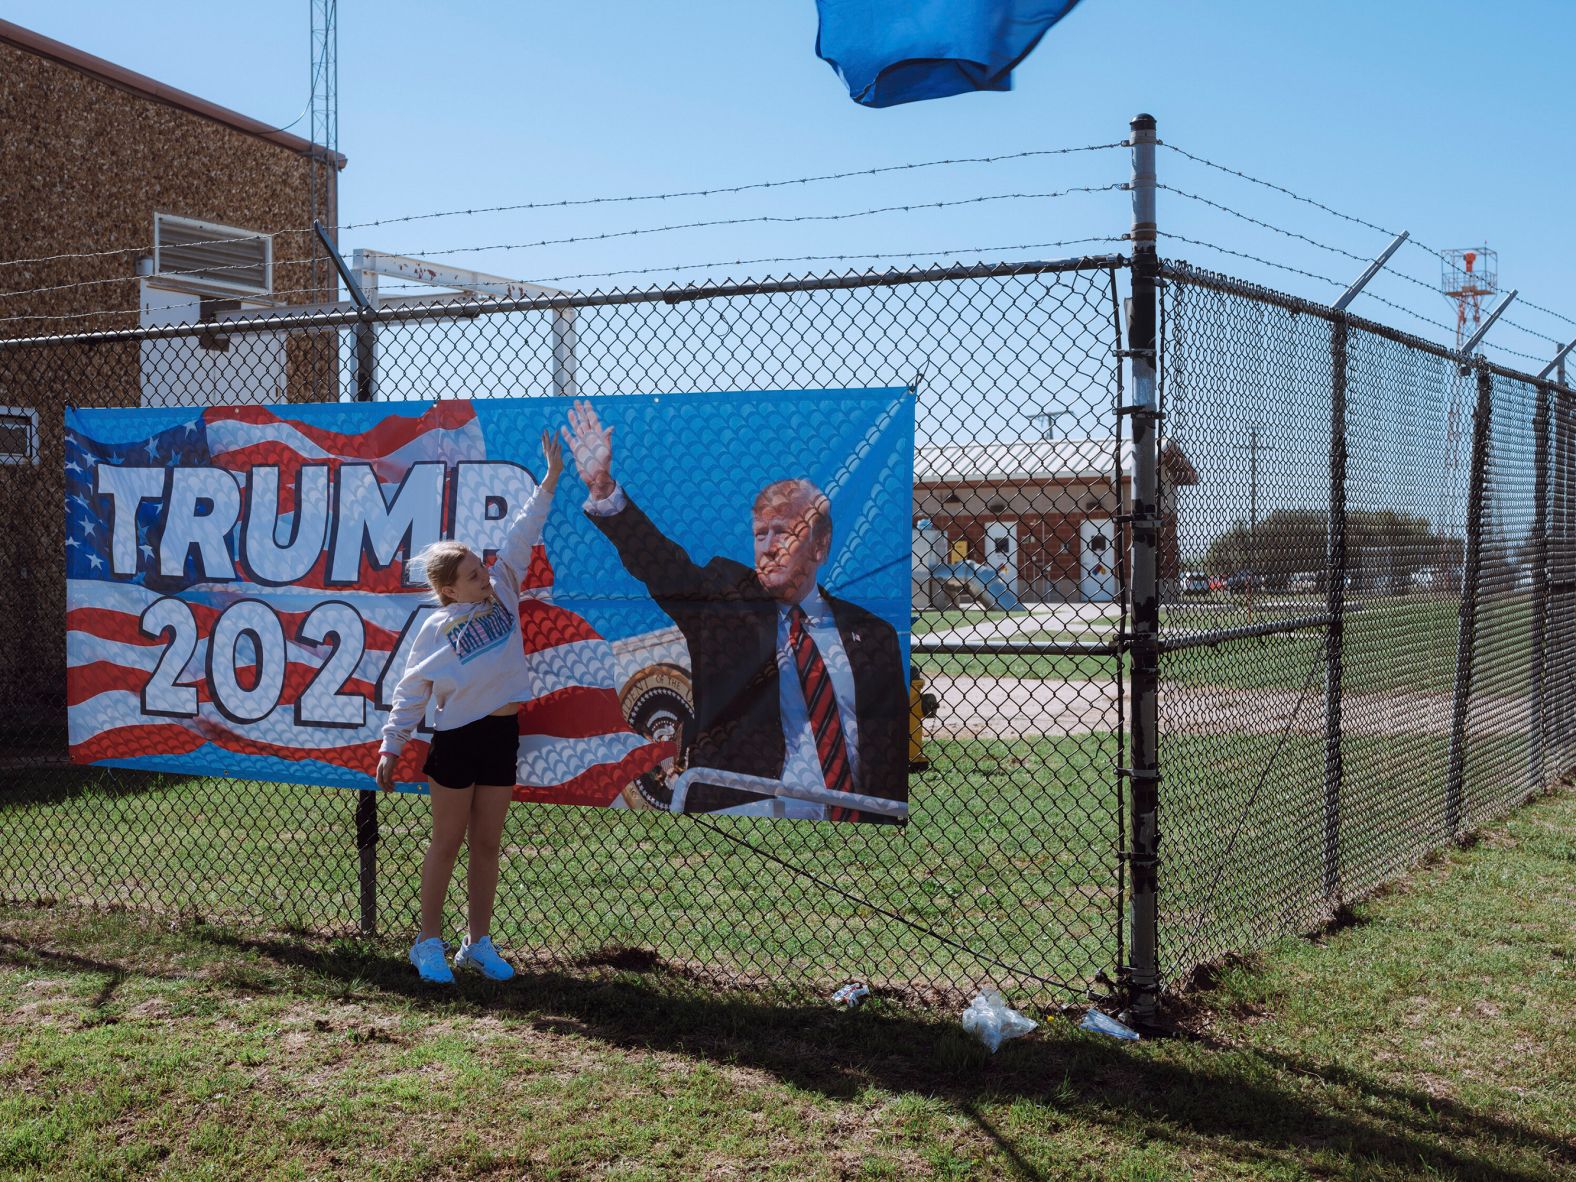 A supporter high-fives a poster at the site of Trump's rally in Waco on March 25, 2023.